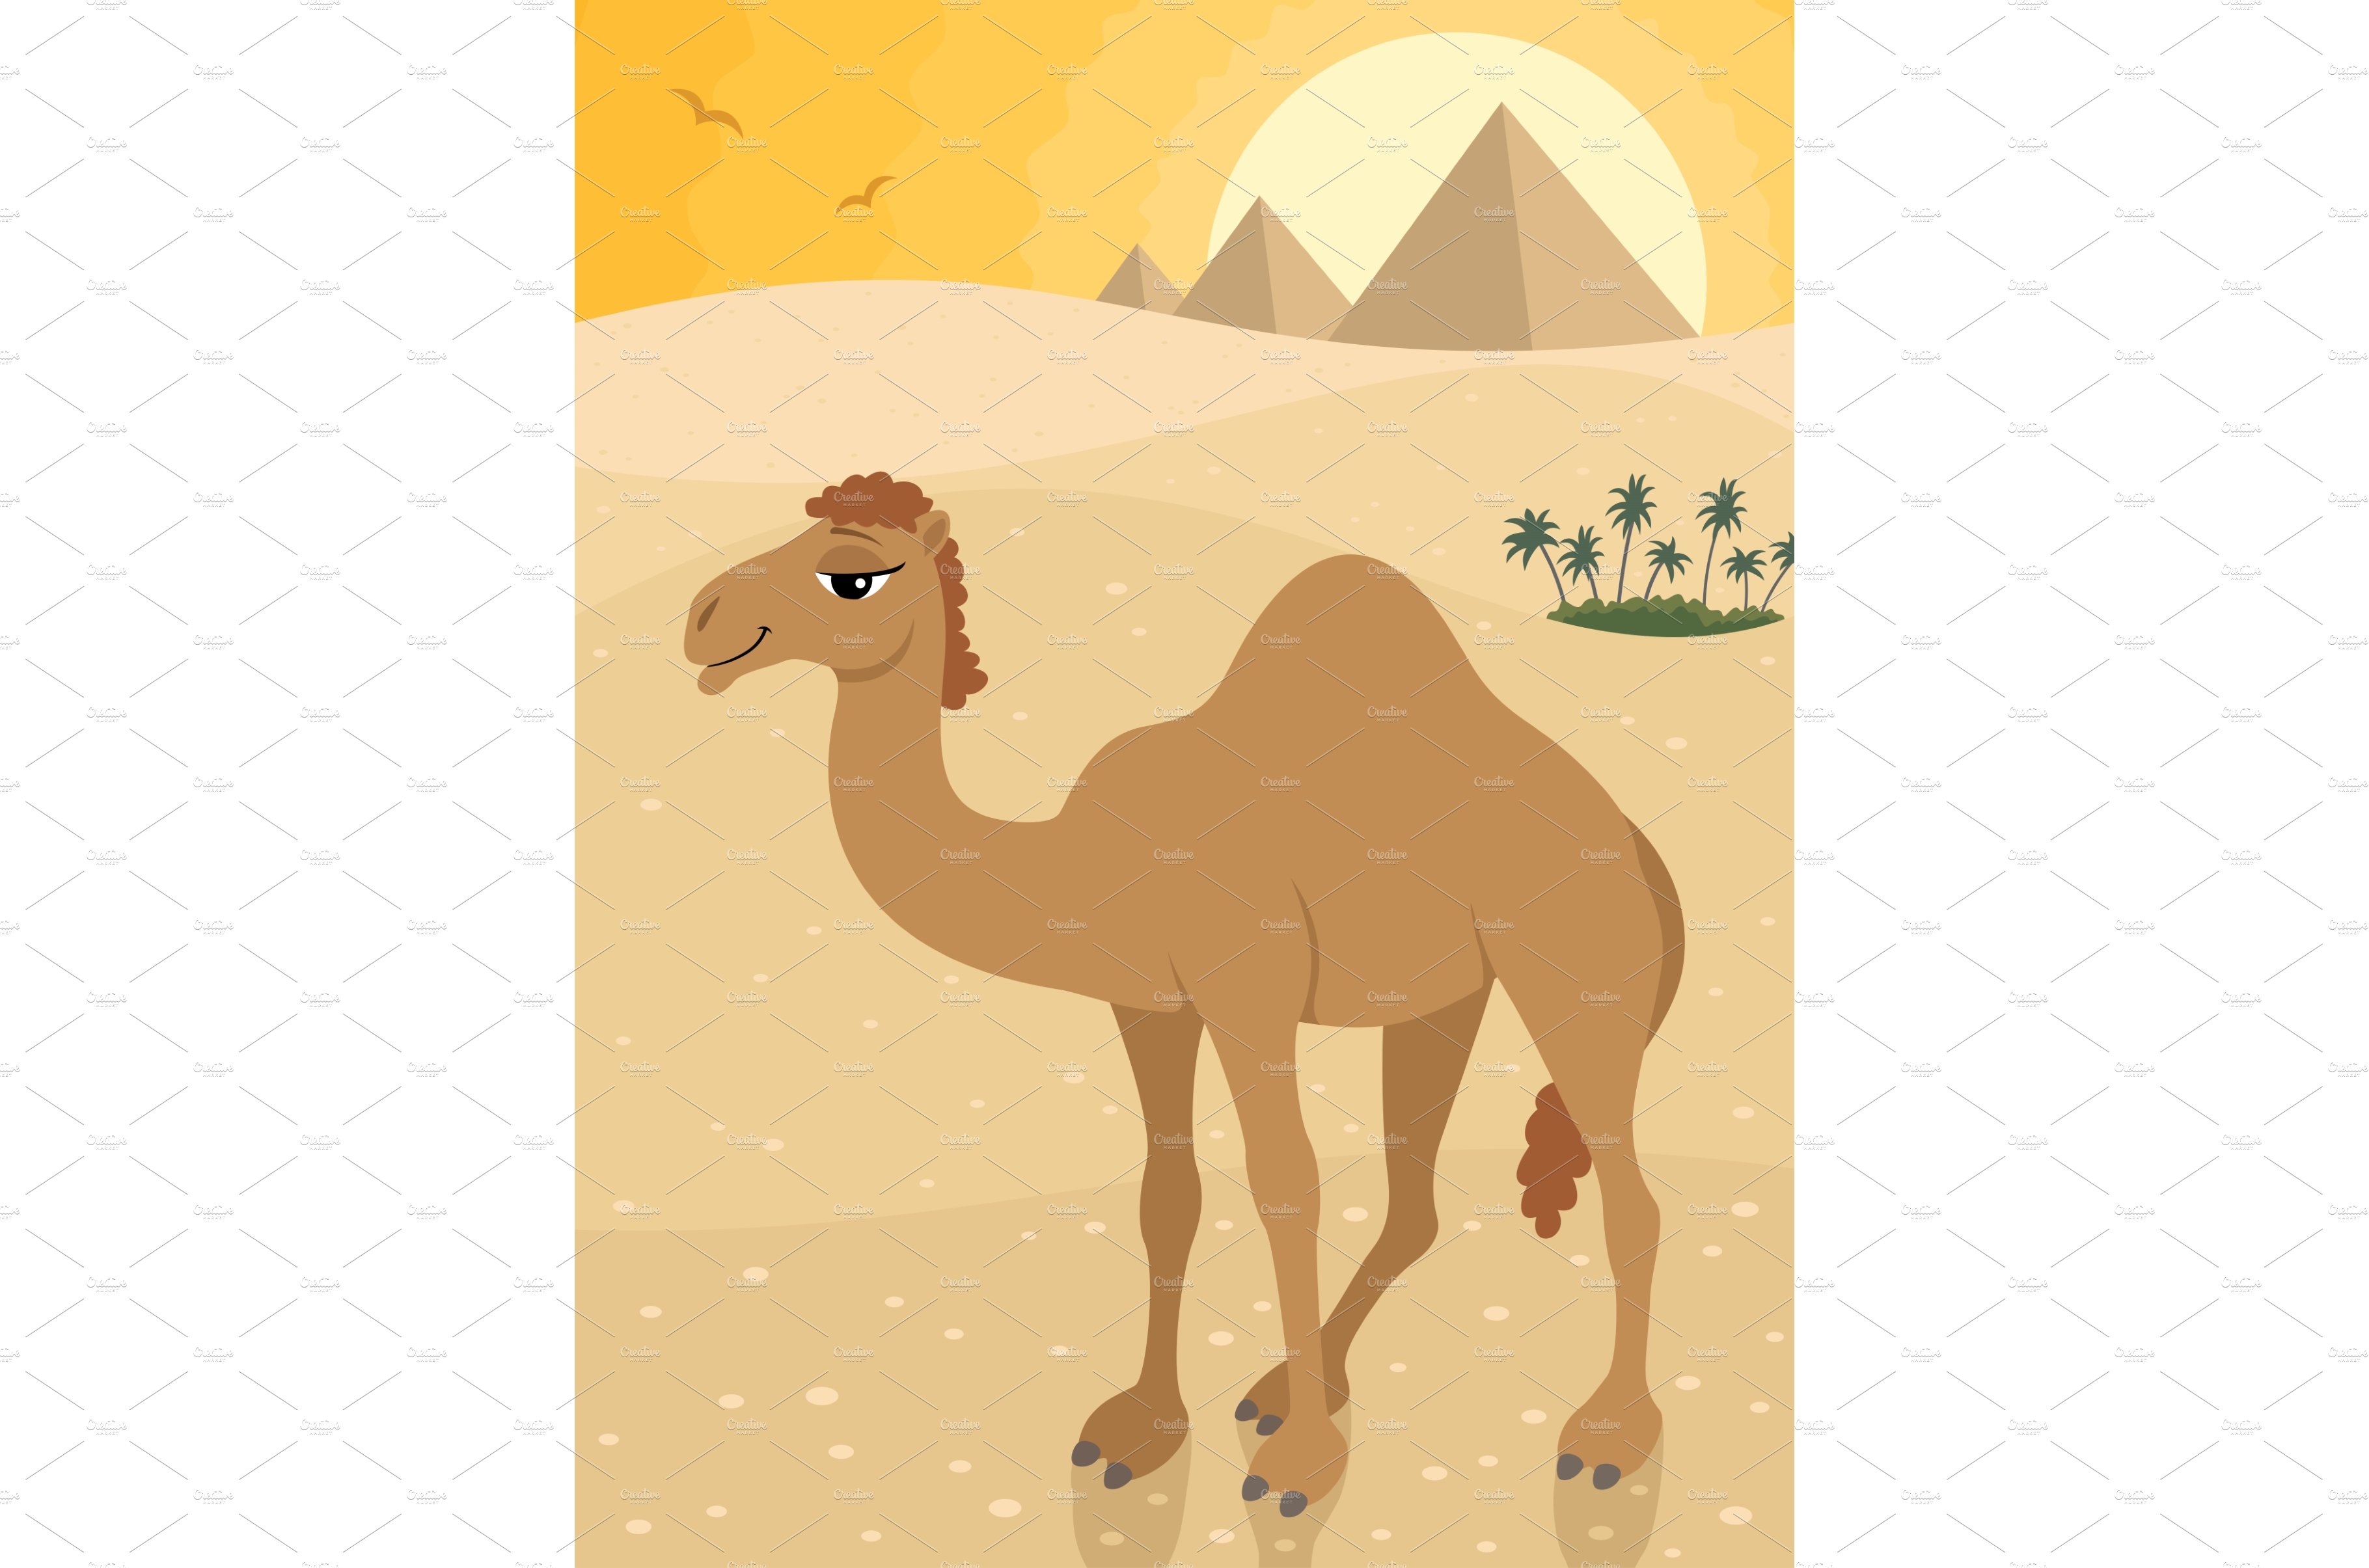 Camel cover image.